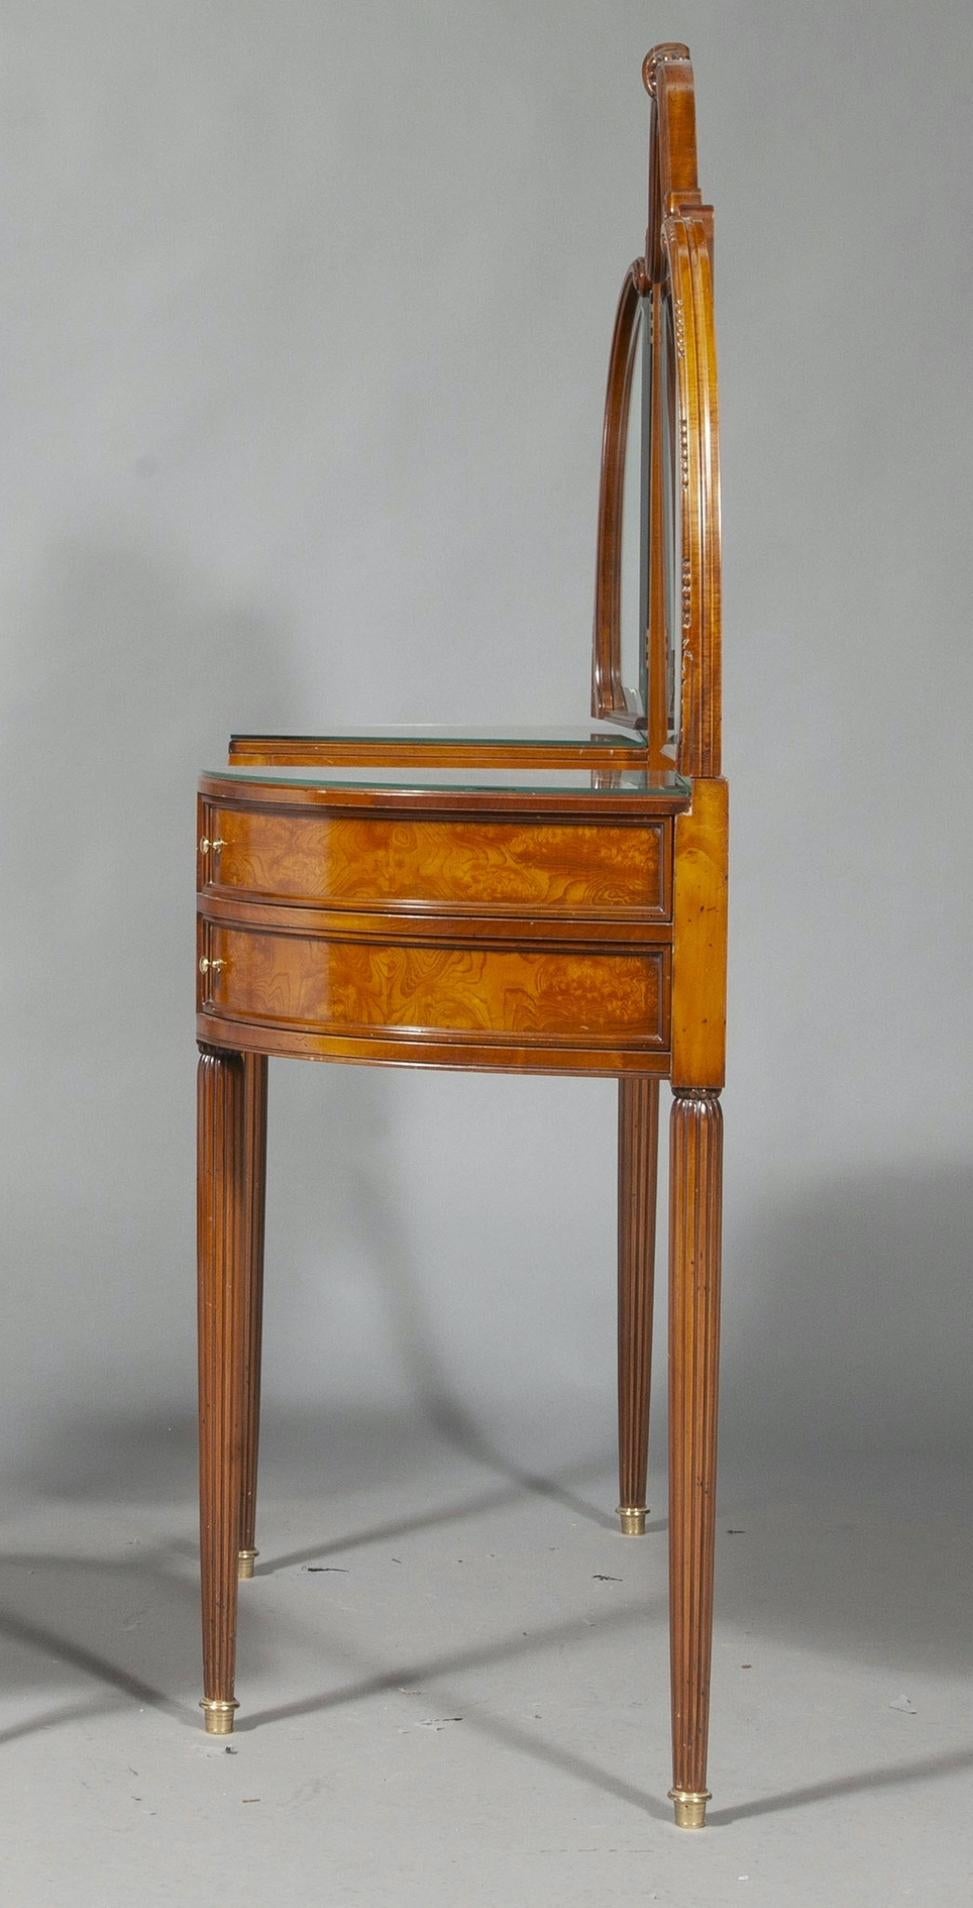 Italian Edwardian Style Walnut Vanity Dressing Table With Chair For Sale 3